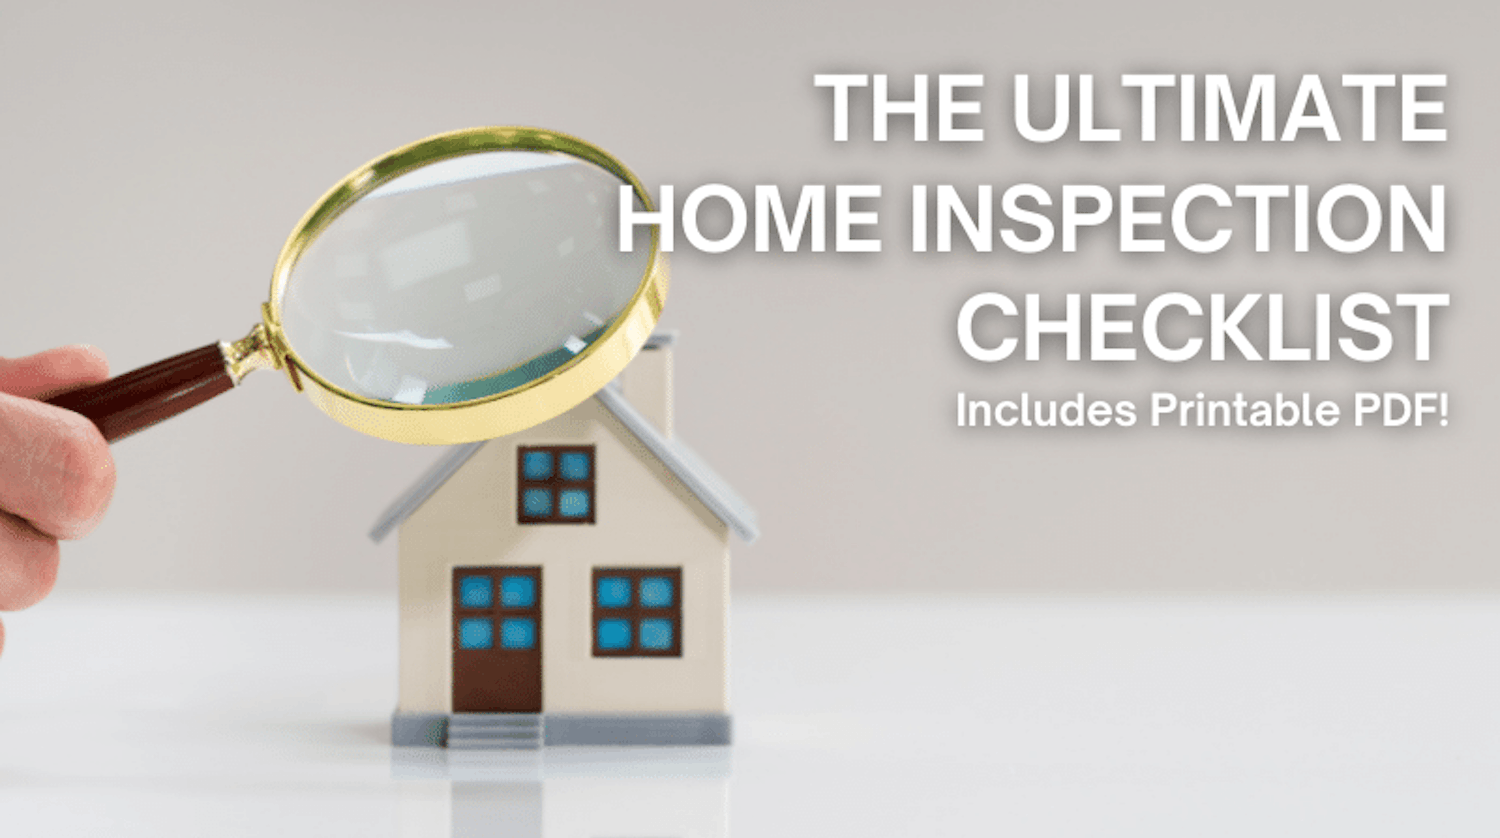 The Ultimate Home Inspection Check List